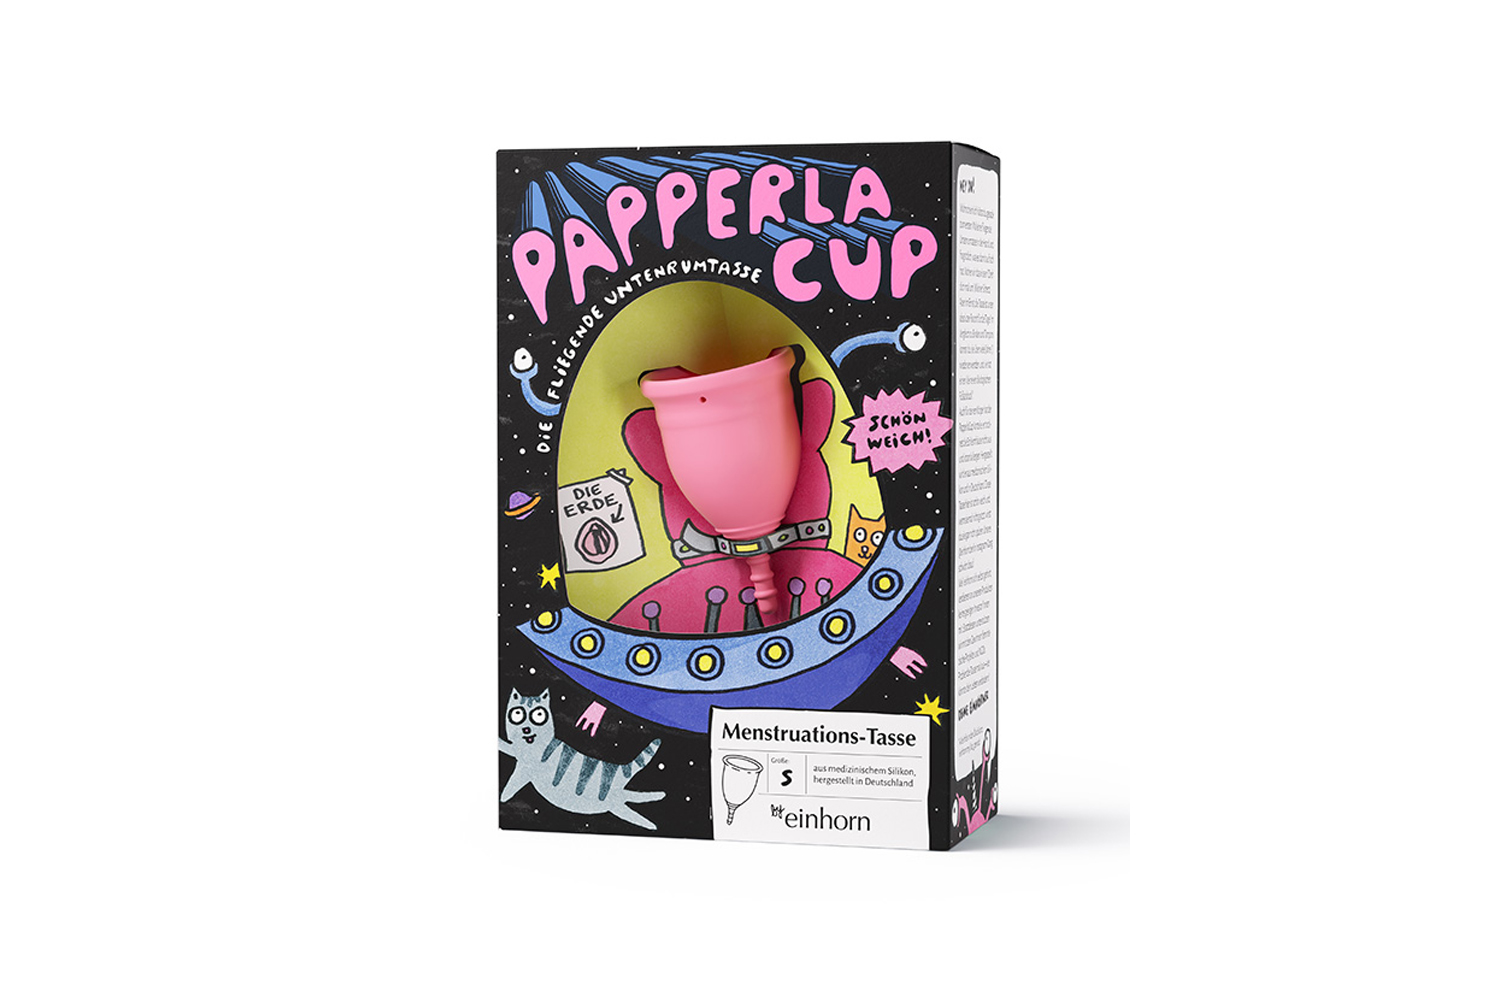 Papperlacup Small